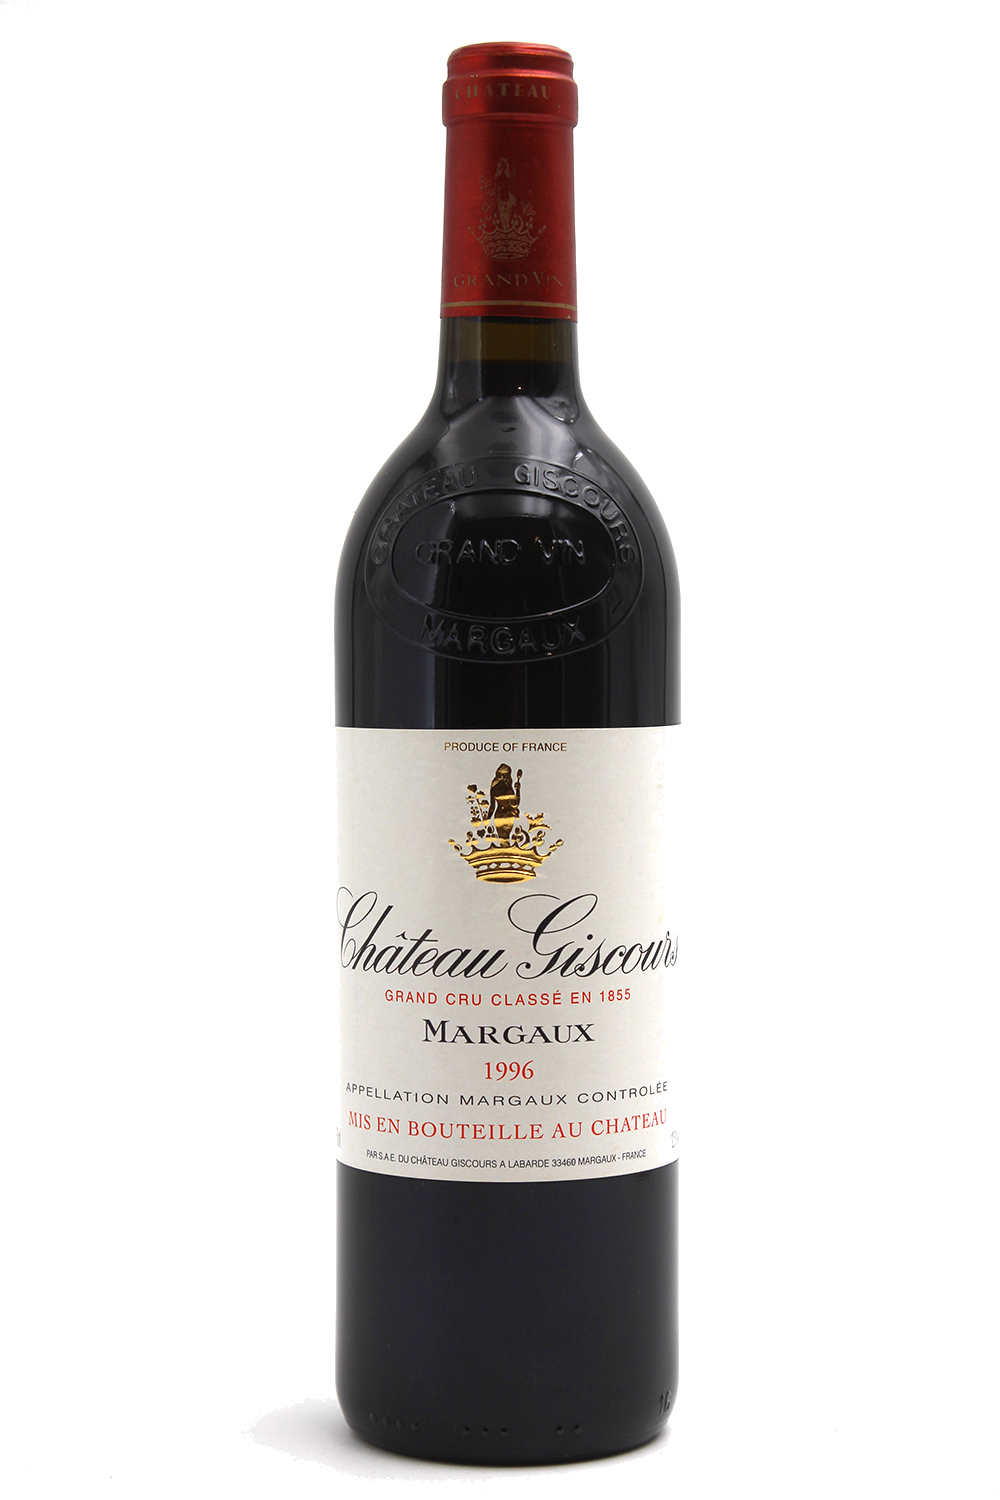 Giscours 1996 Margaux